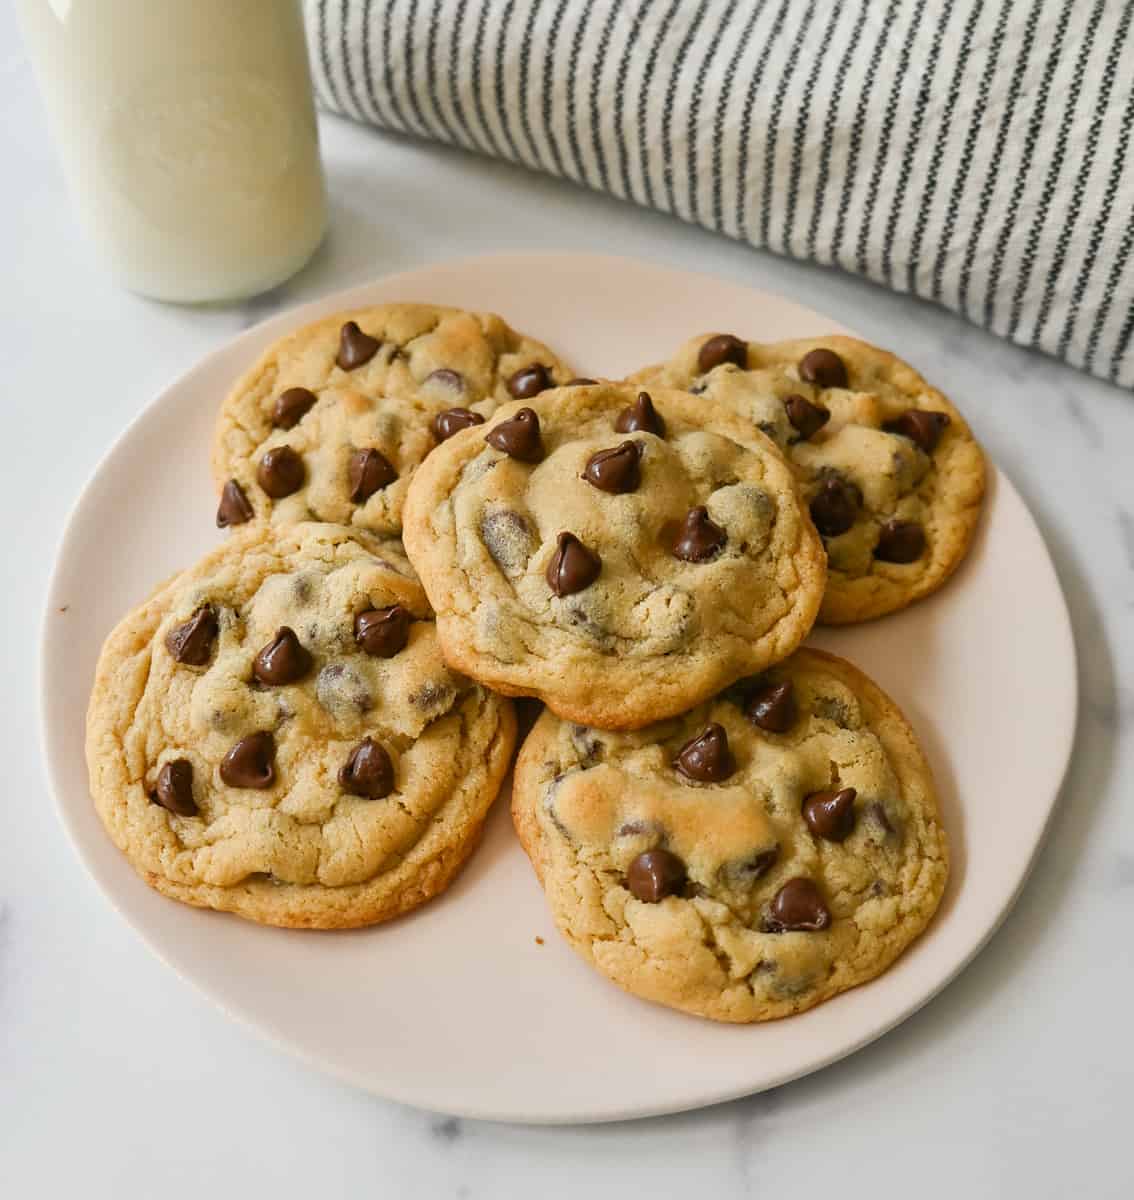 The Best Nestle Toll House Cookie Recipe. How to make the classic Nestle Chocolate Chip Cookie Recipe. This is one of the most popular soft chocolate chip cookie recipes in the world! 